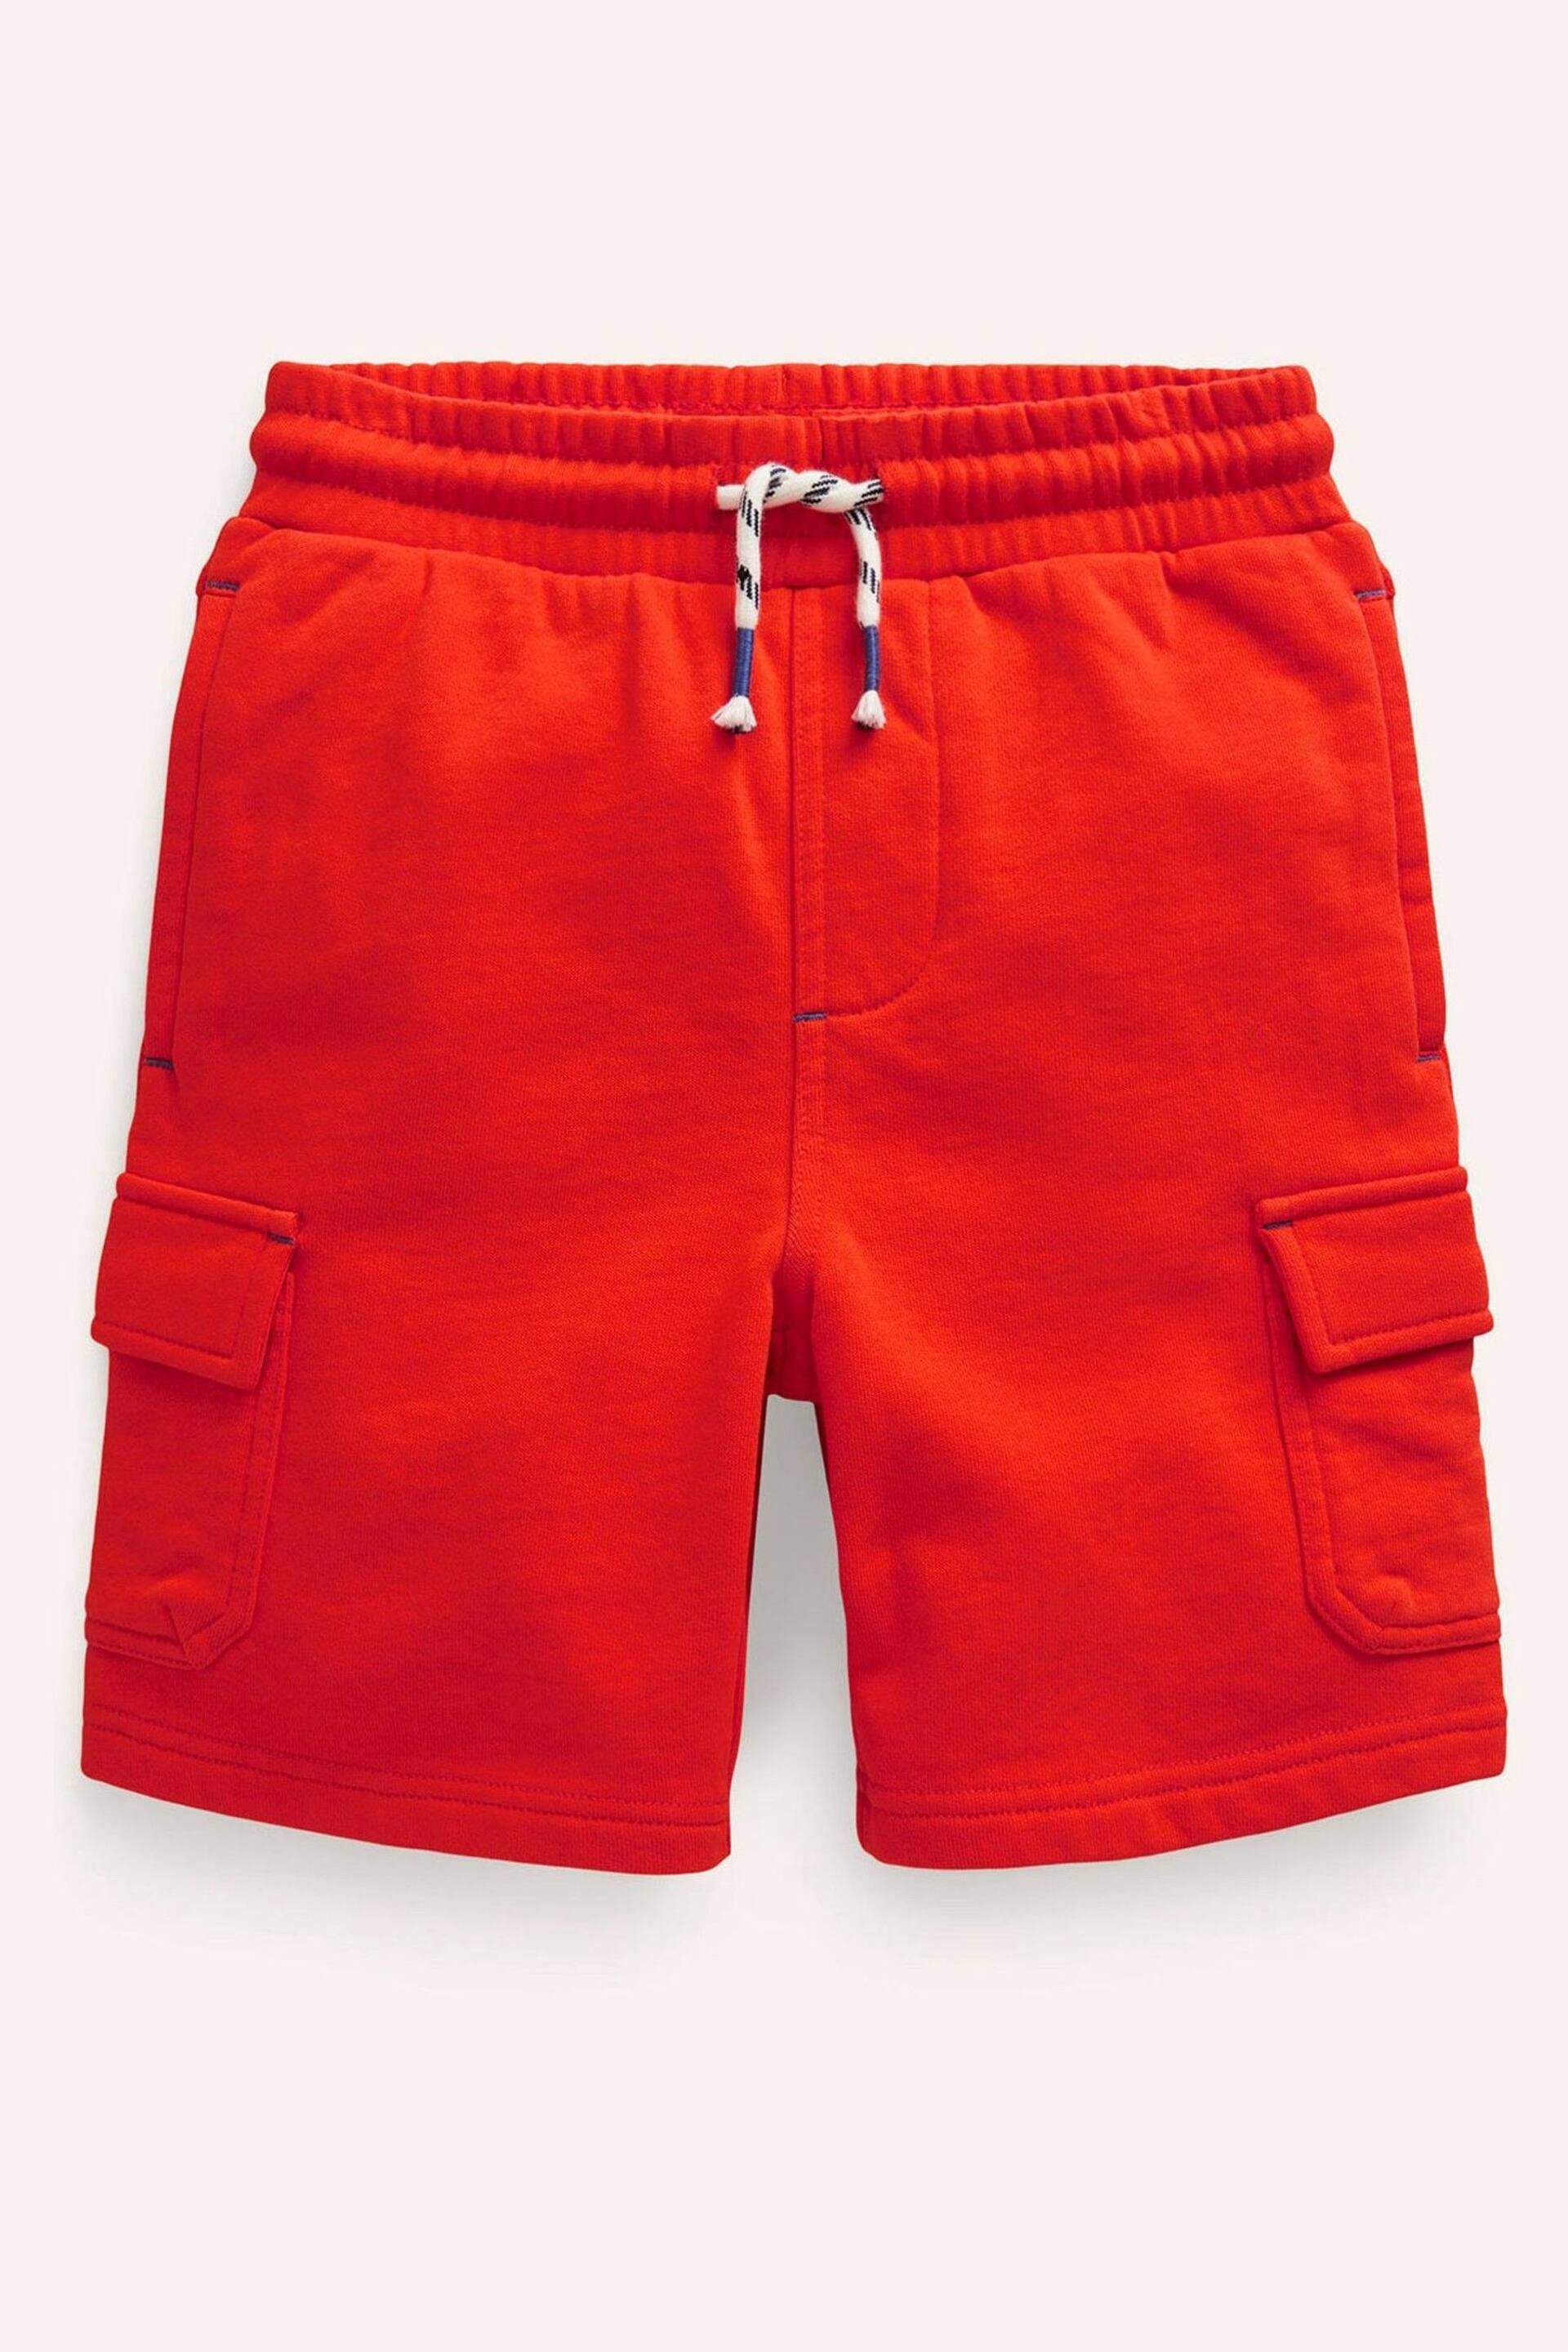 Boden Red Jersey Cargo Shorts - Image 1 of 3